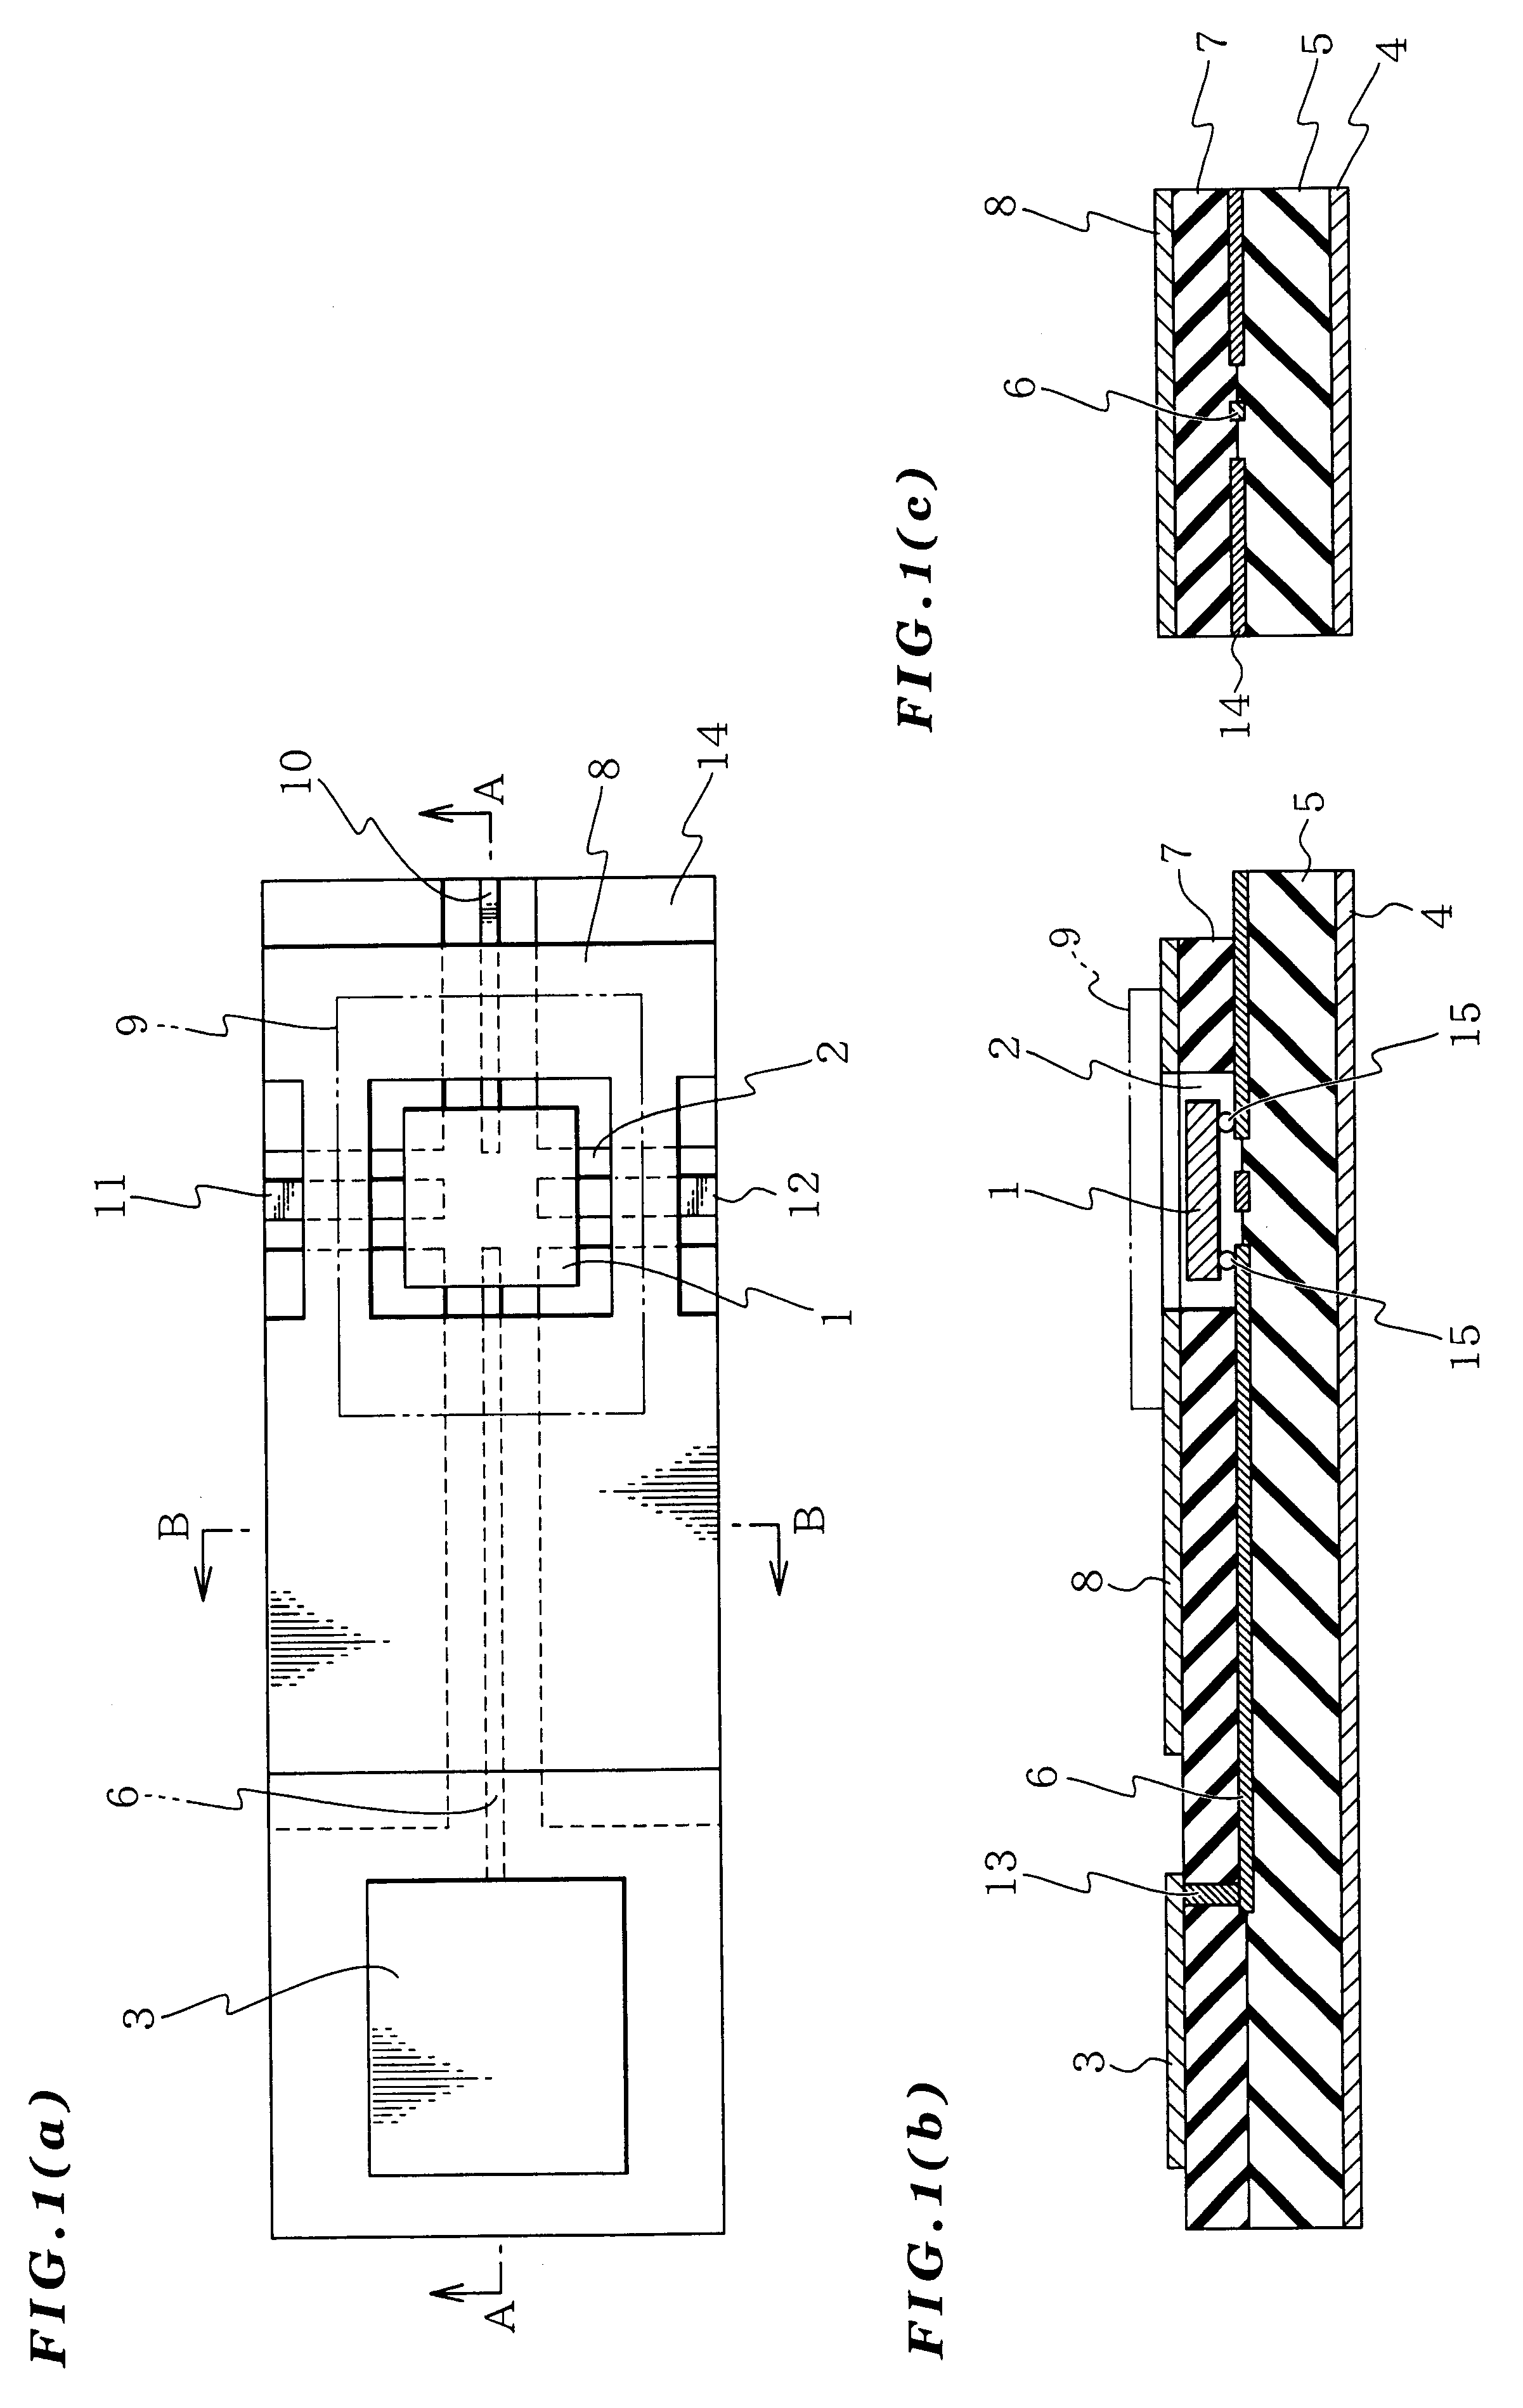 Microwave and millimeter wave circuit apparatus